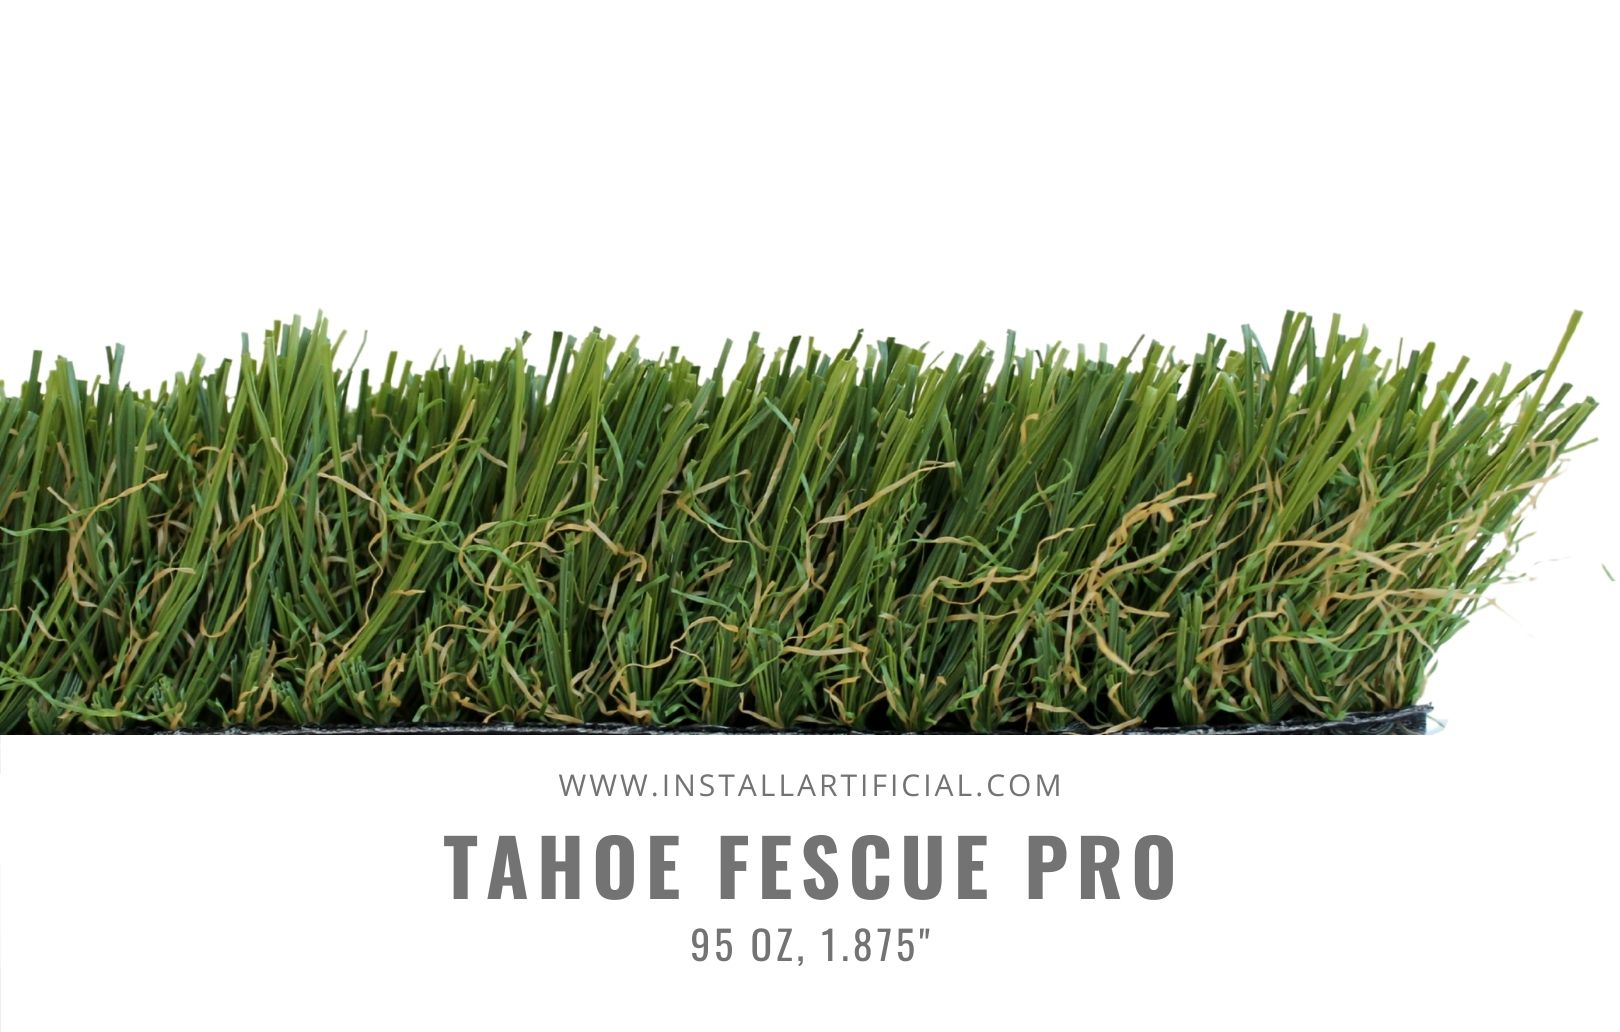 Tahoe Fescue Pro, Synthetic Grass Warehouse, Tiger Turf, side